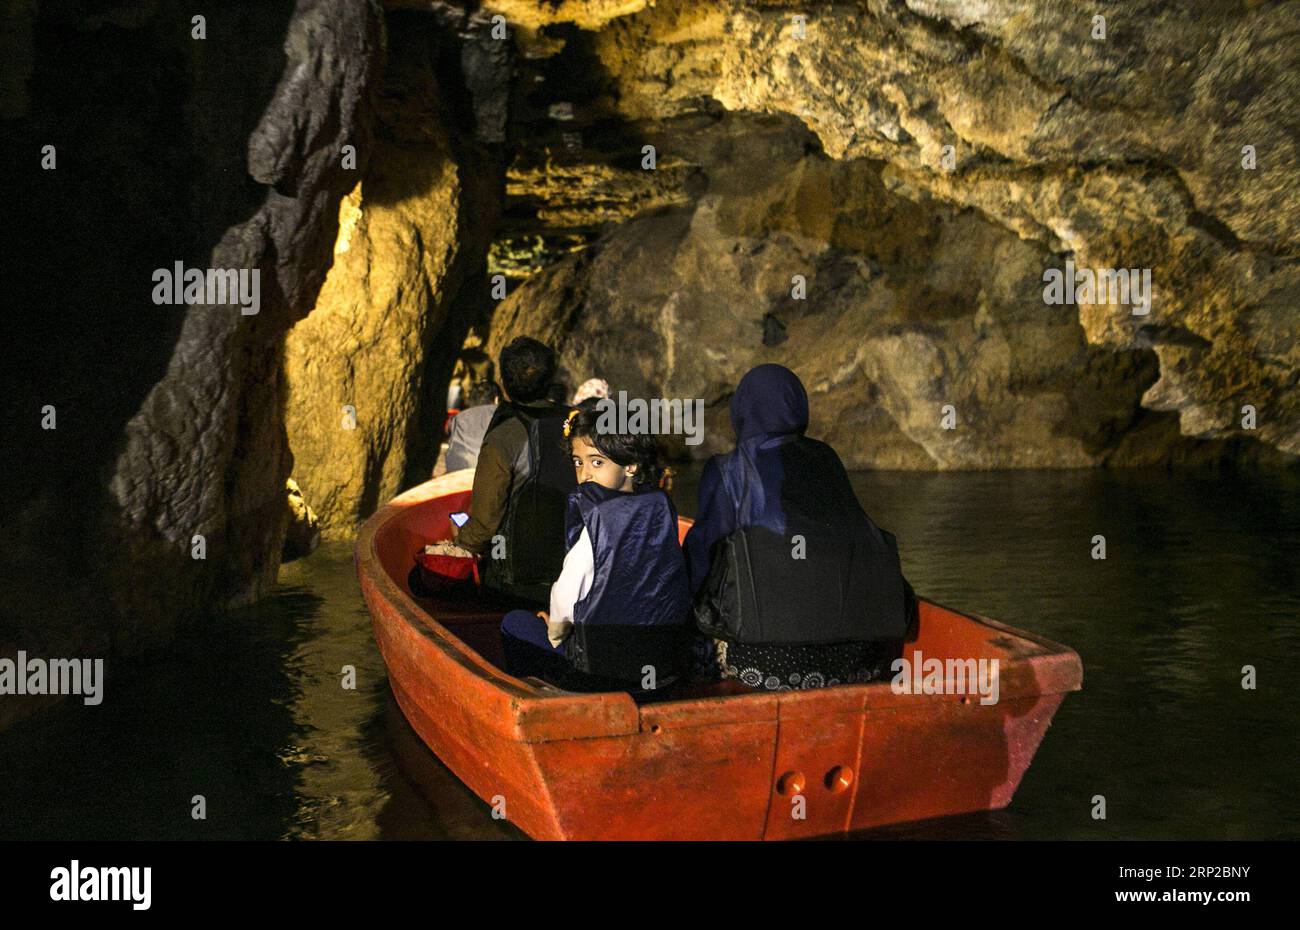 (180829) -- HAMEDAN, Aug. 29, 2018 -- Tourists visit Alisadr cave on a boat in Hamedan province, western Iran, on Aug. 27, 2018. Alisadr Cave attracts thousands of tourists every year. ) (qxy) IRAN-HAMEDAN-ALISADR CAVE AhmadxHalabisaz PUBLICATIONxNOTxINxCHN Stock Photo